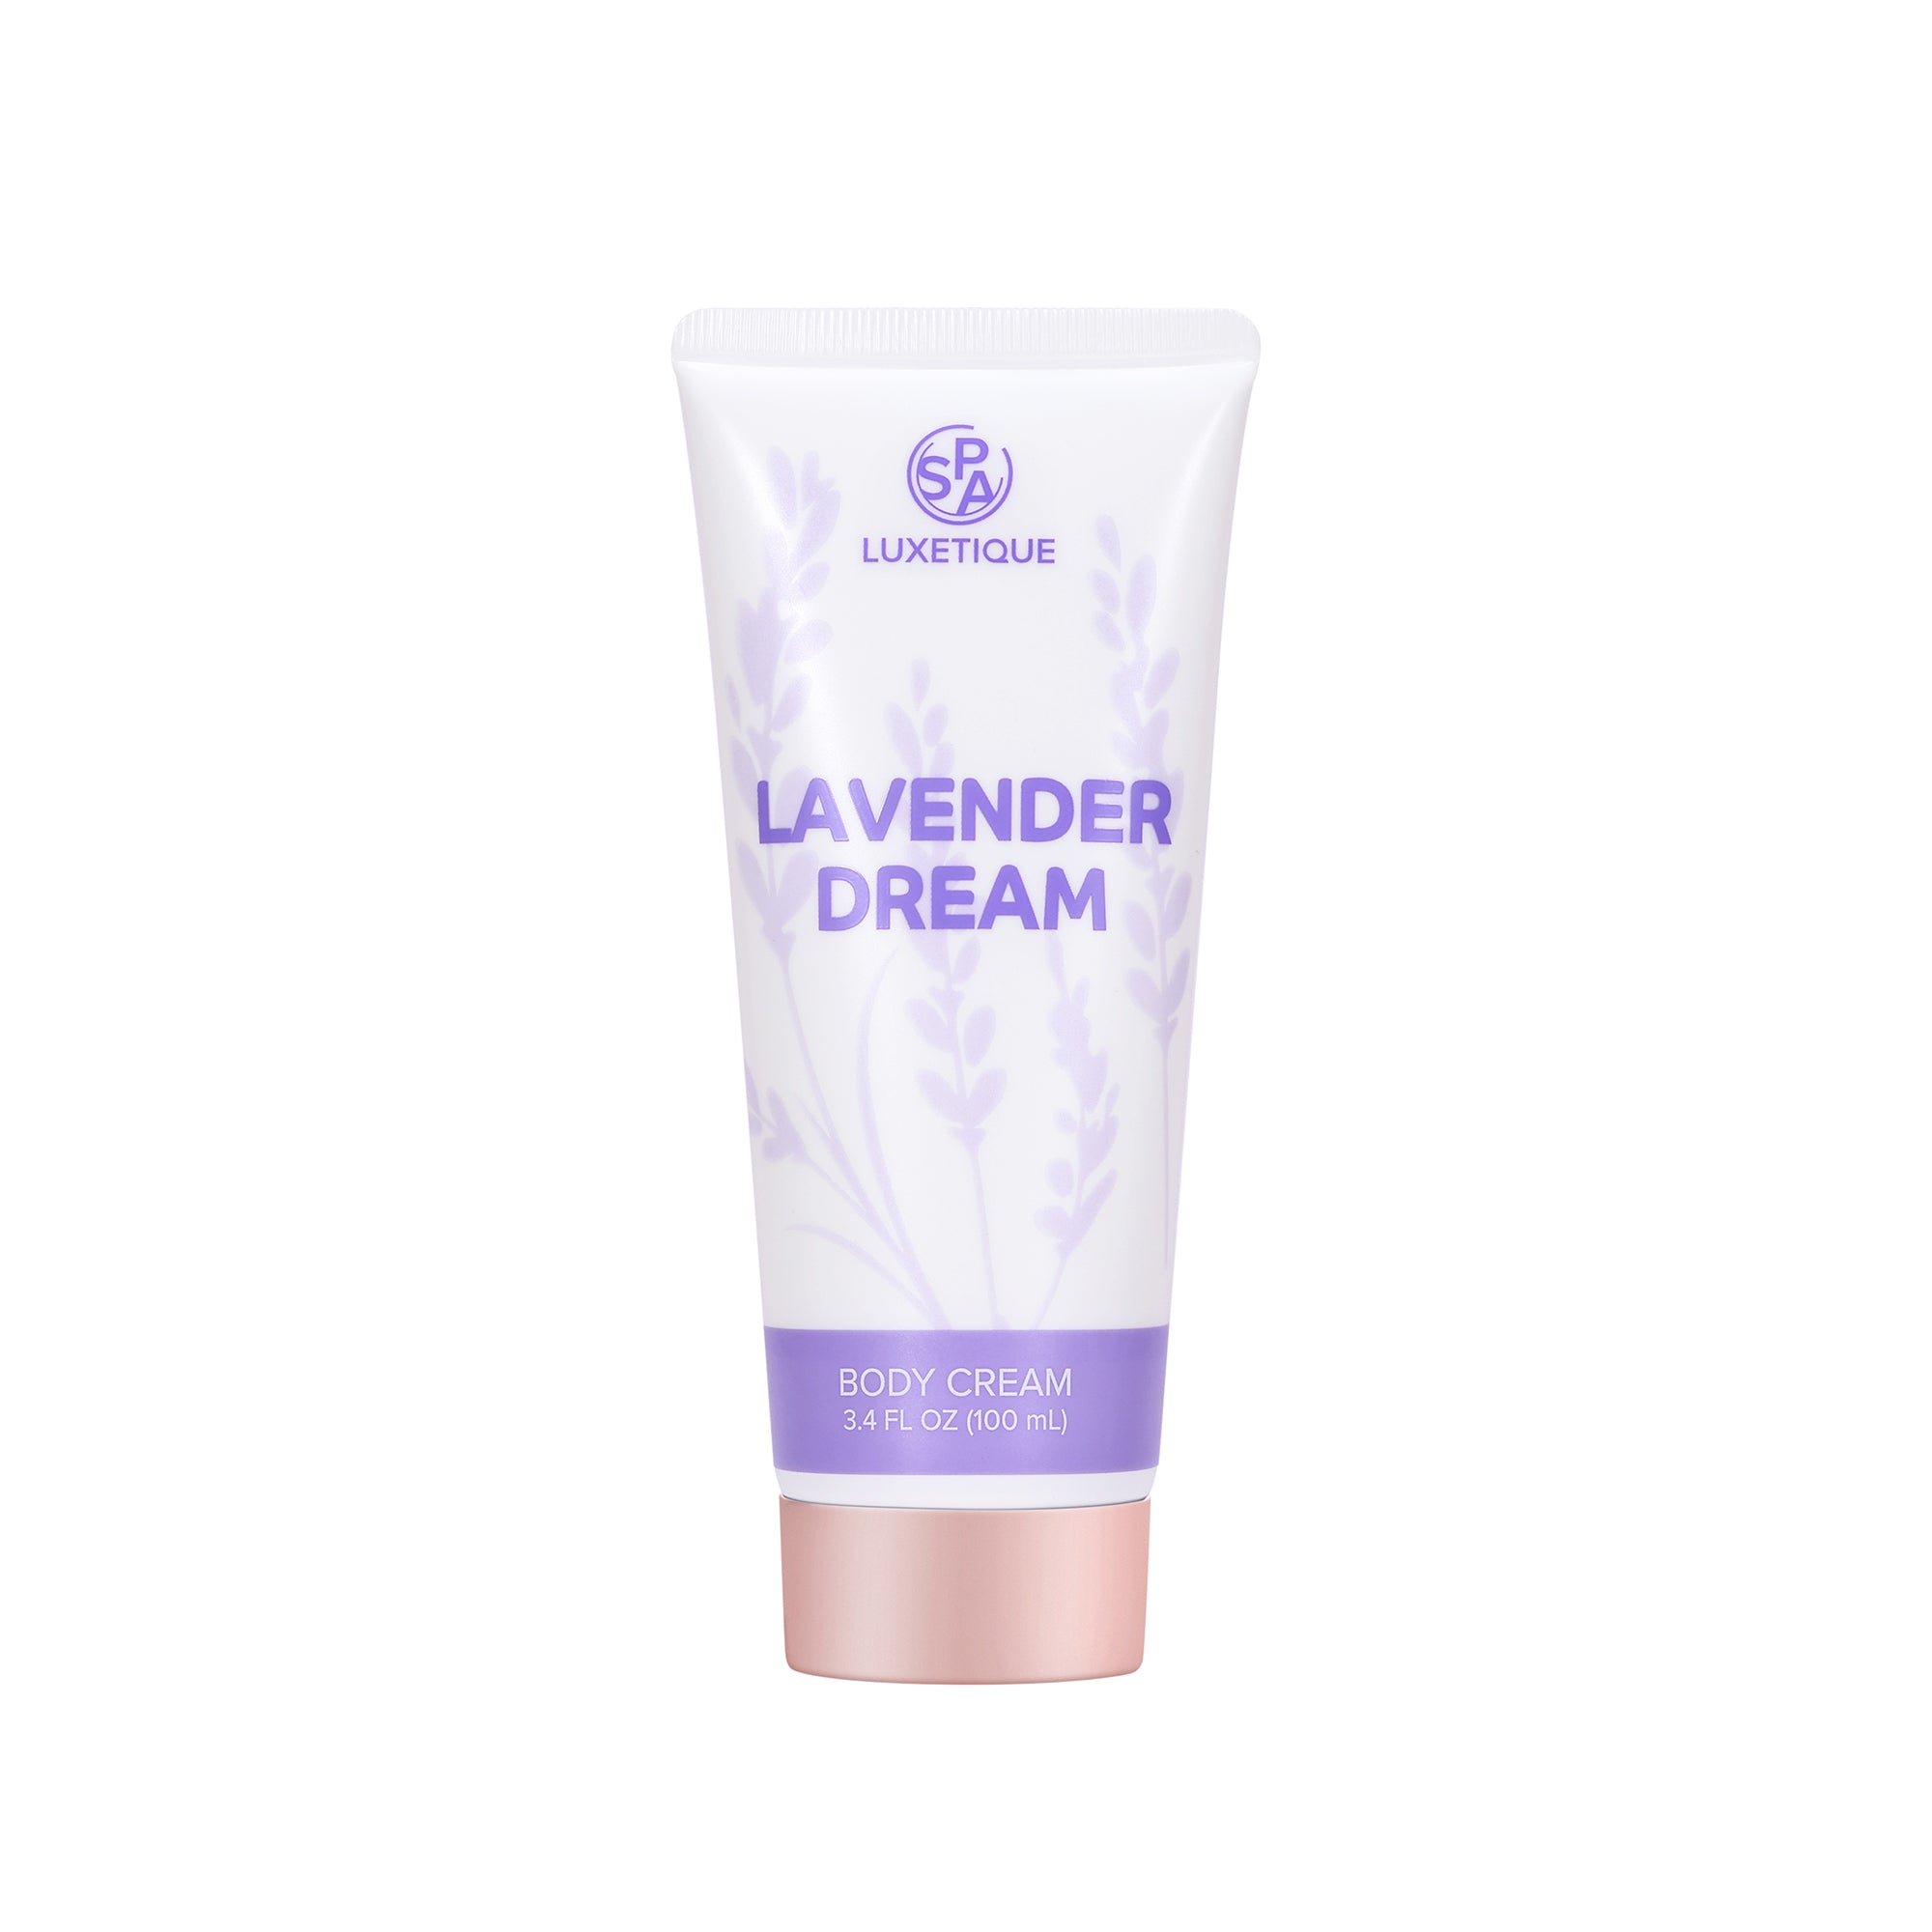 SPA Luxetique Lavender Dream Body Cream Enriched with the magic of nature, this heavenly body cream is packed full of nourishing ingredients that do your skin and soul some good. 